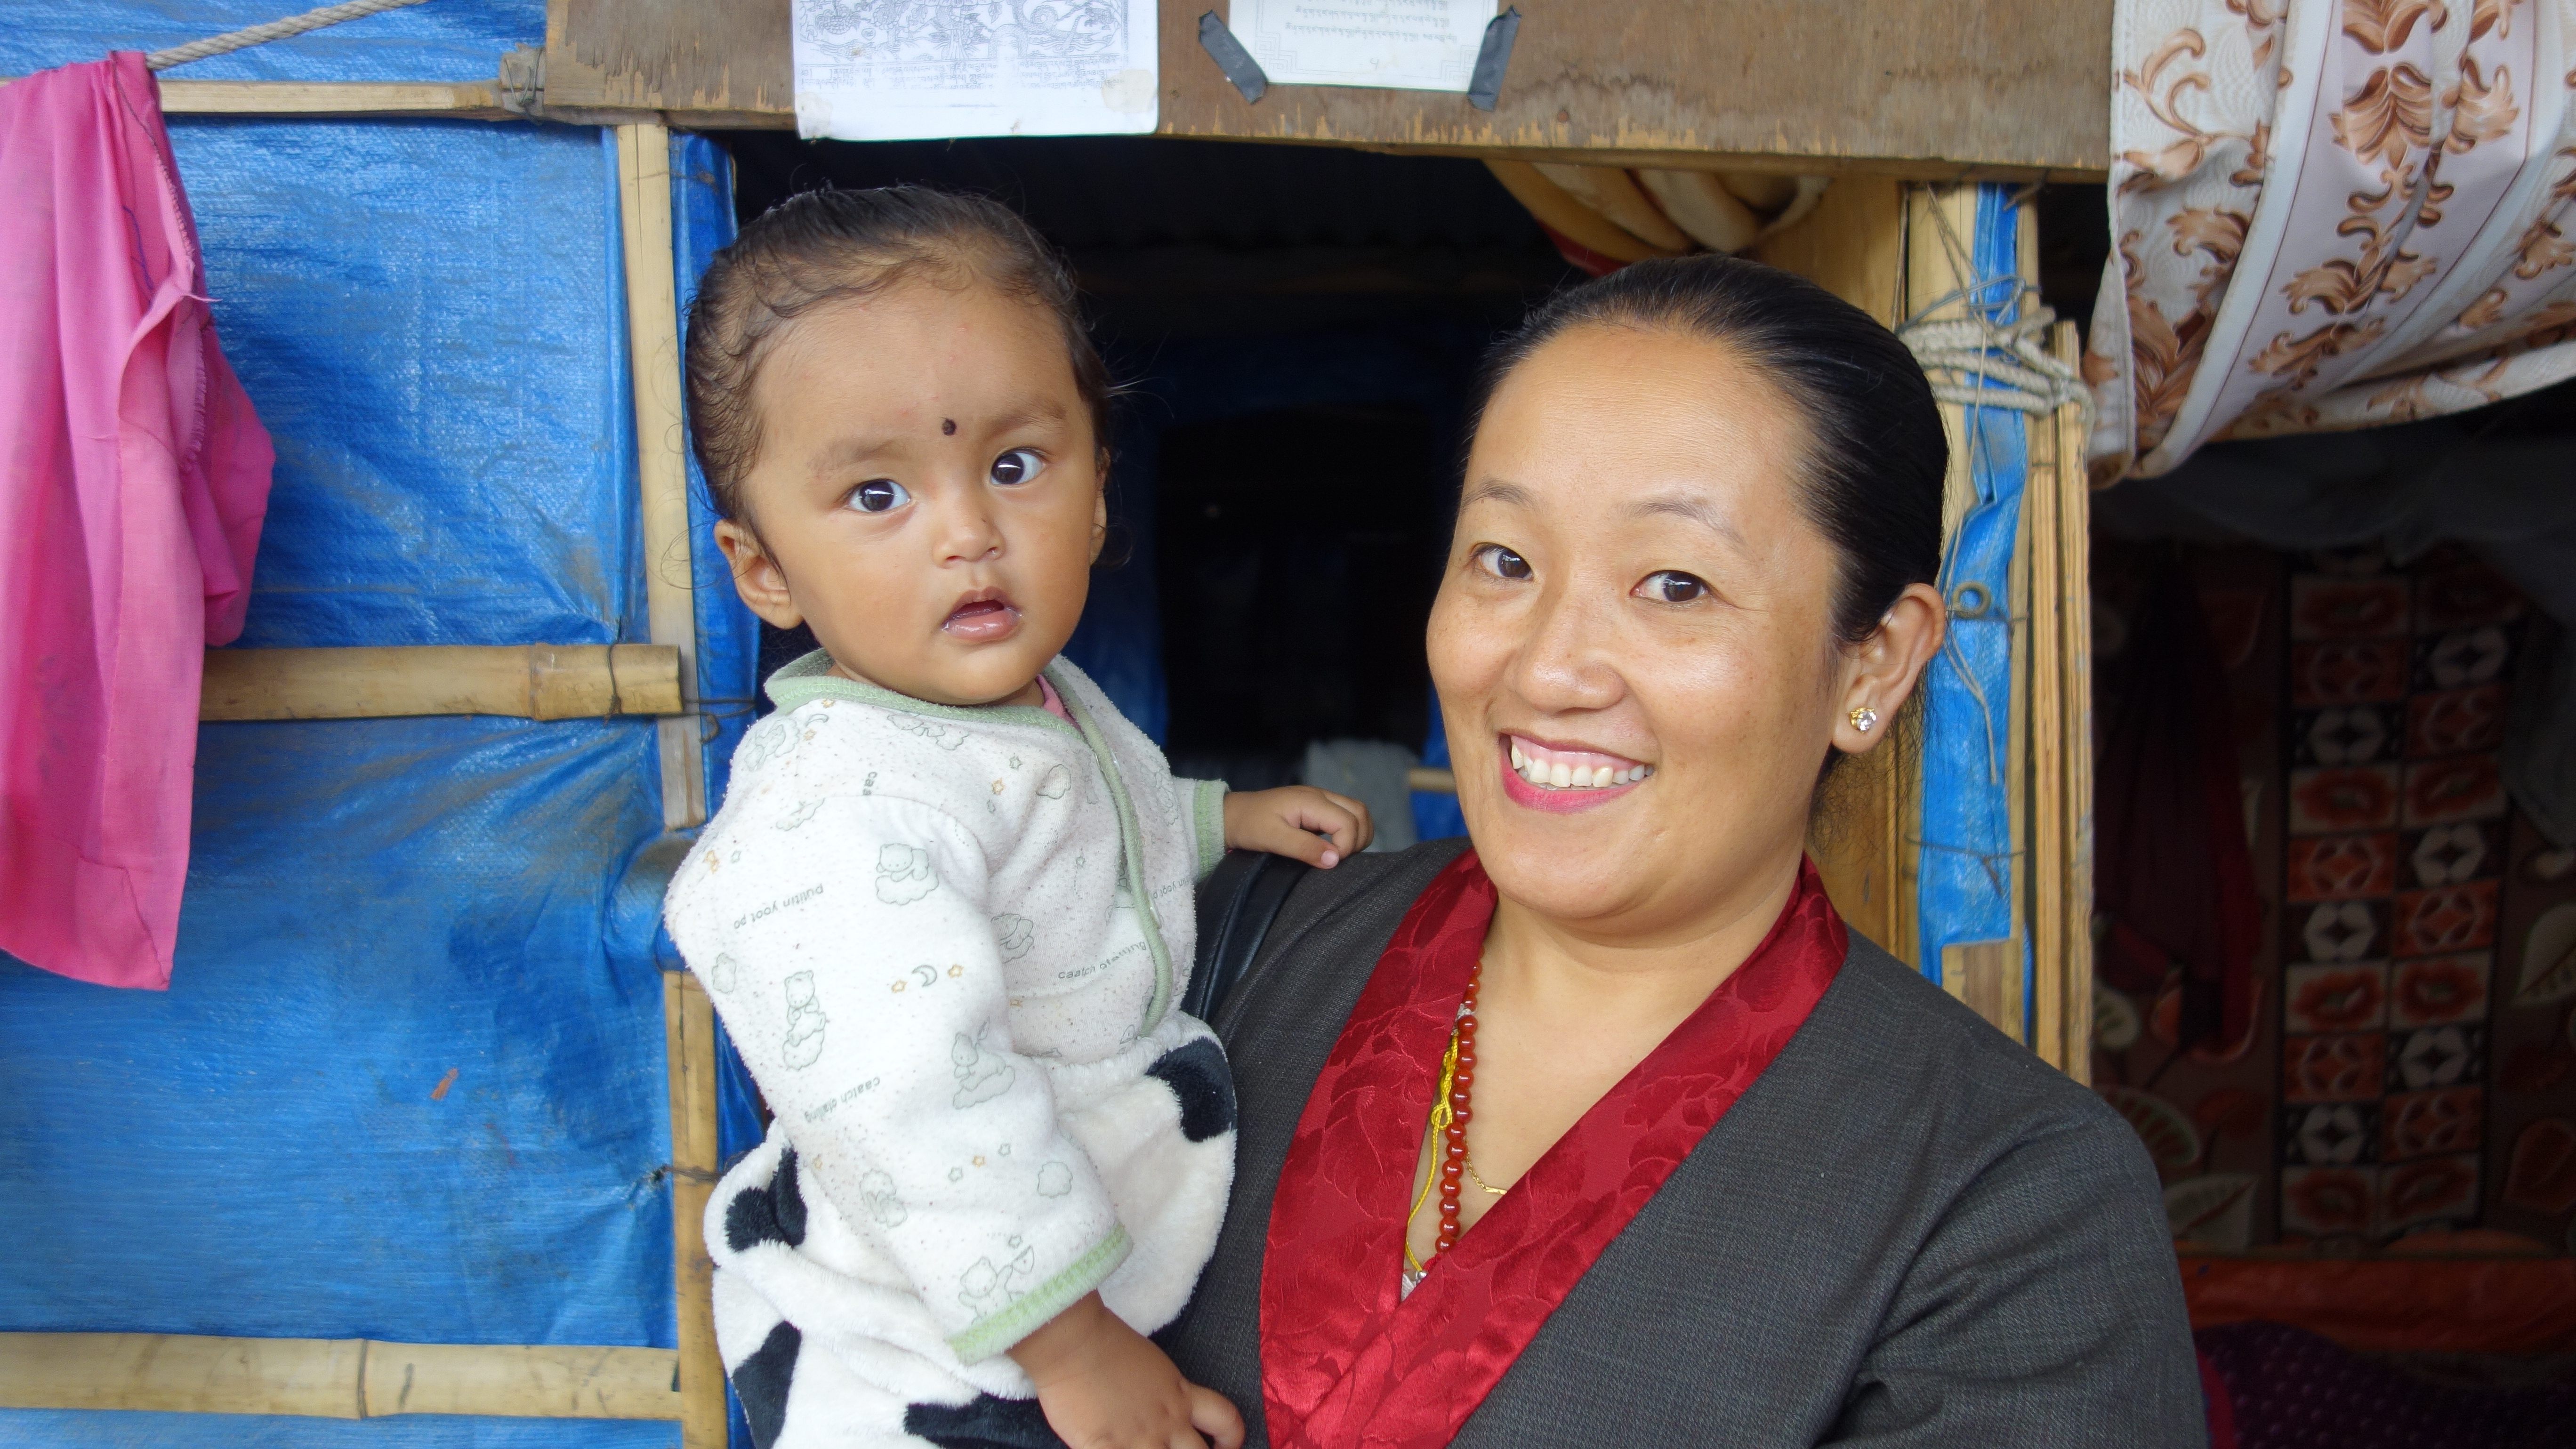 EpiNurse Thakchi Sherpa greatly helps the victims of the earthquake 2015 to find shelter and healthcare. 